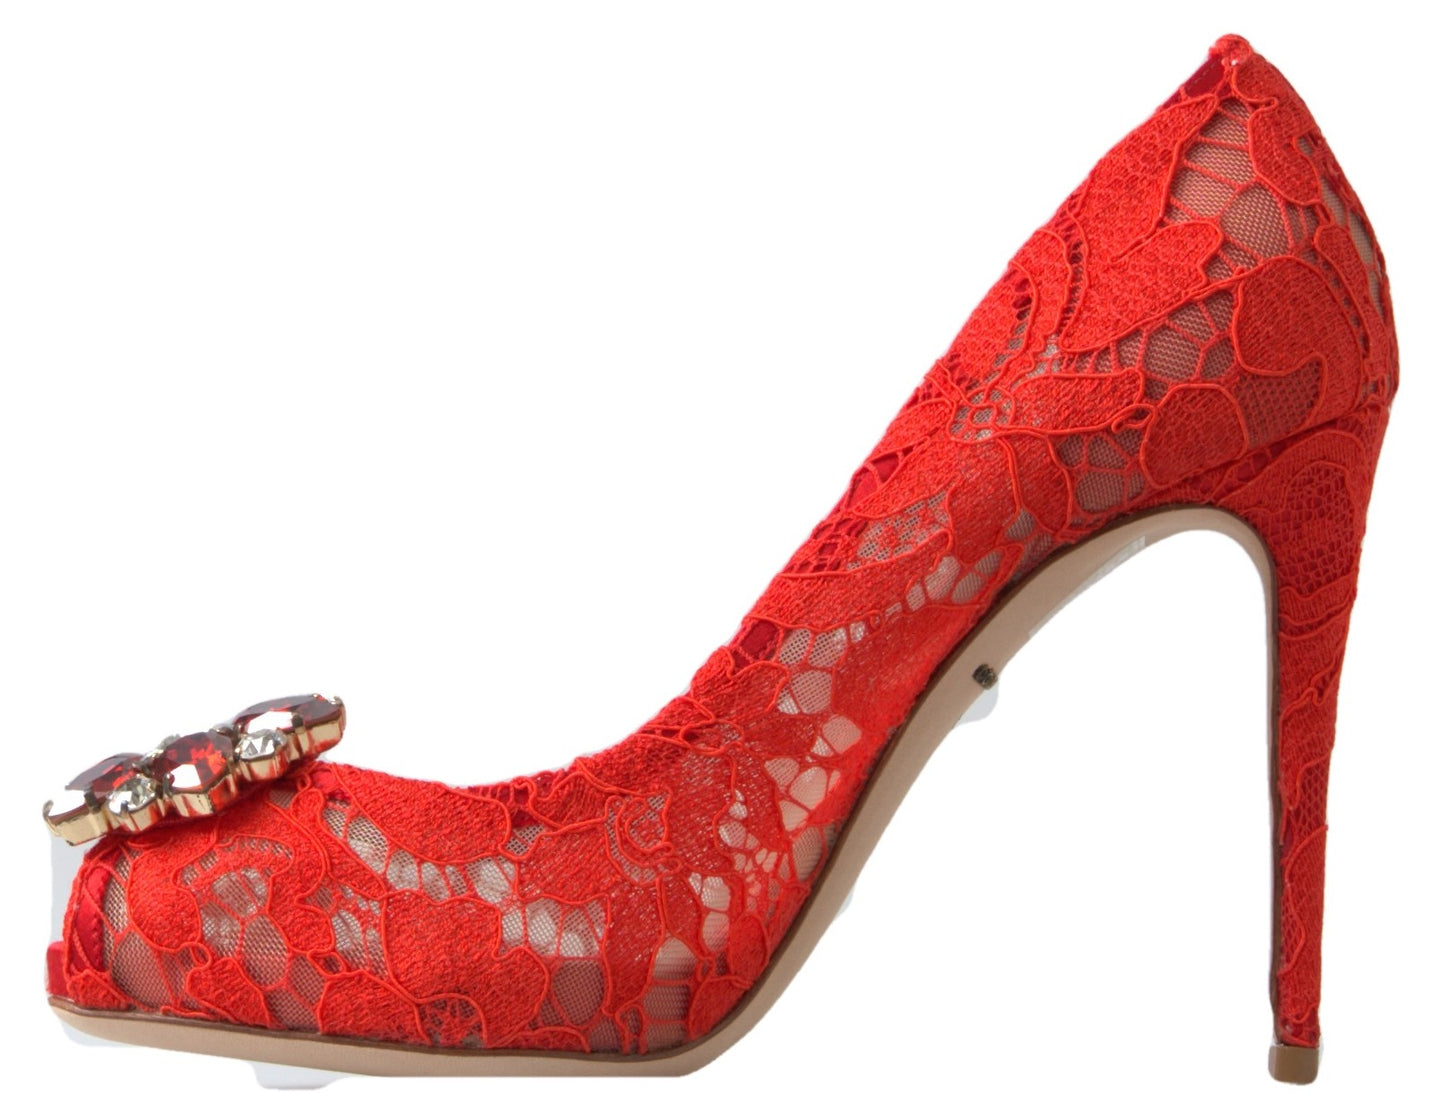 Chic Red Lace Heels with Crystal Embellishment